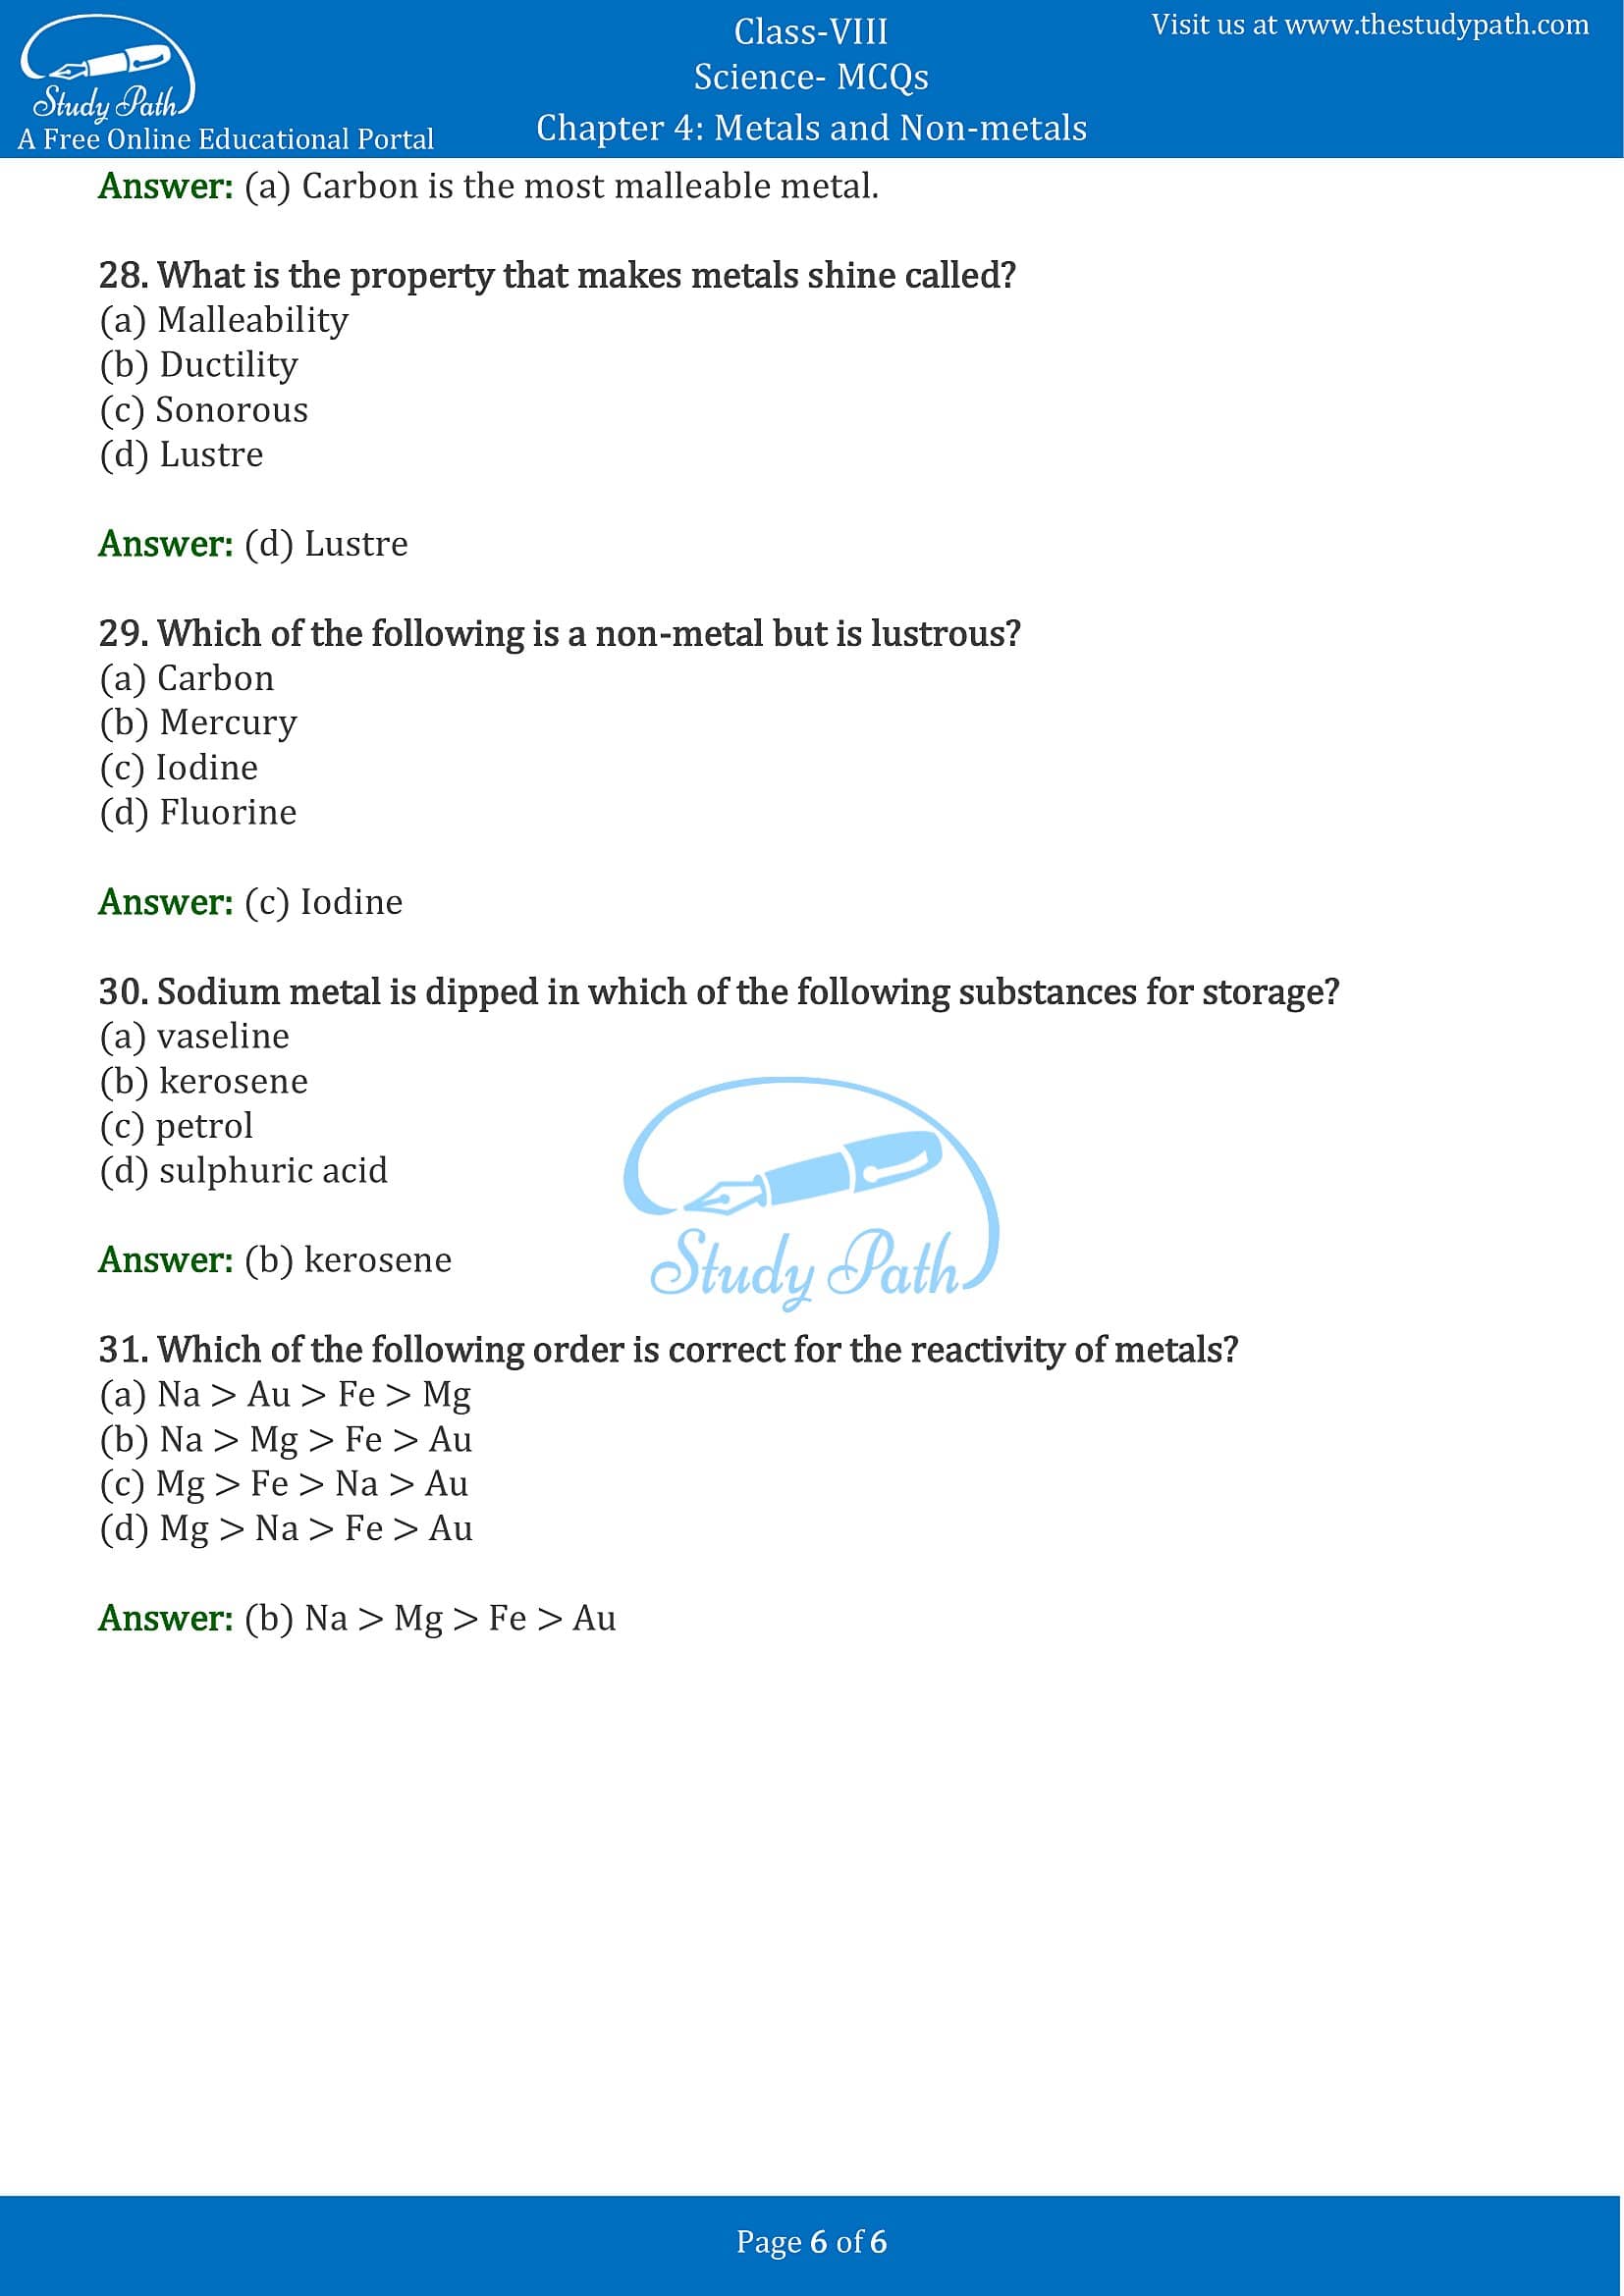 MCQ Questions for Class 8 Science Chapter 4 Metals and Non-metals with Answers PDF -6